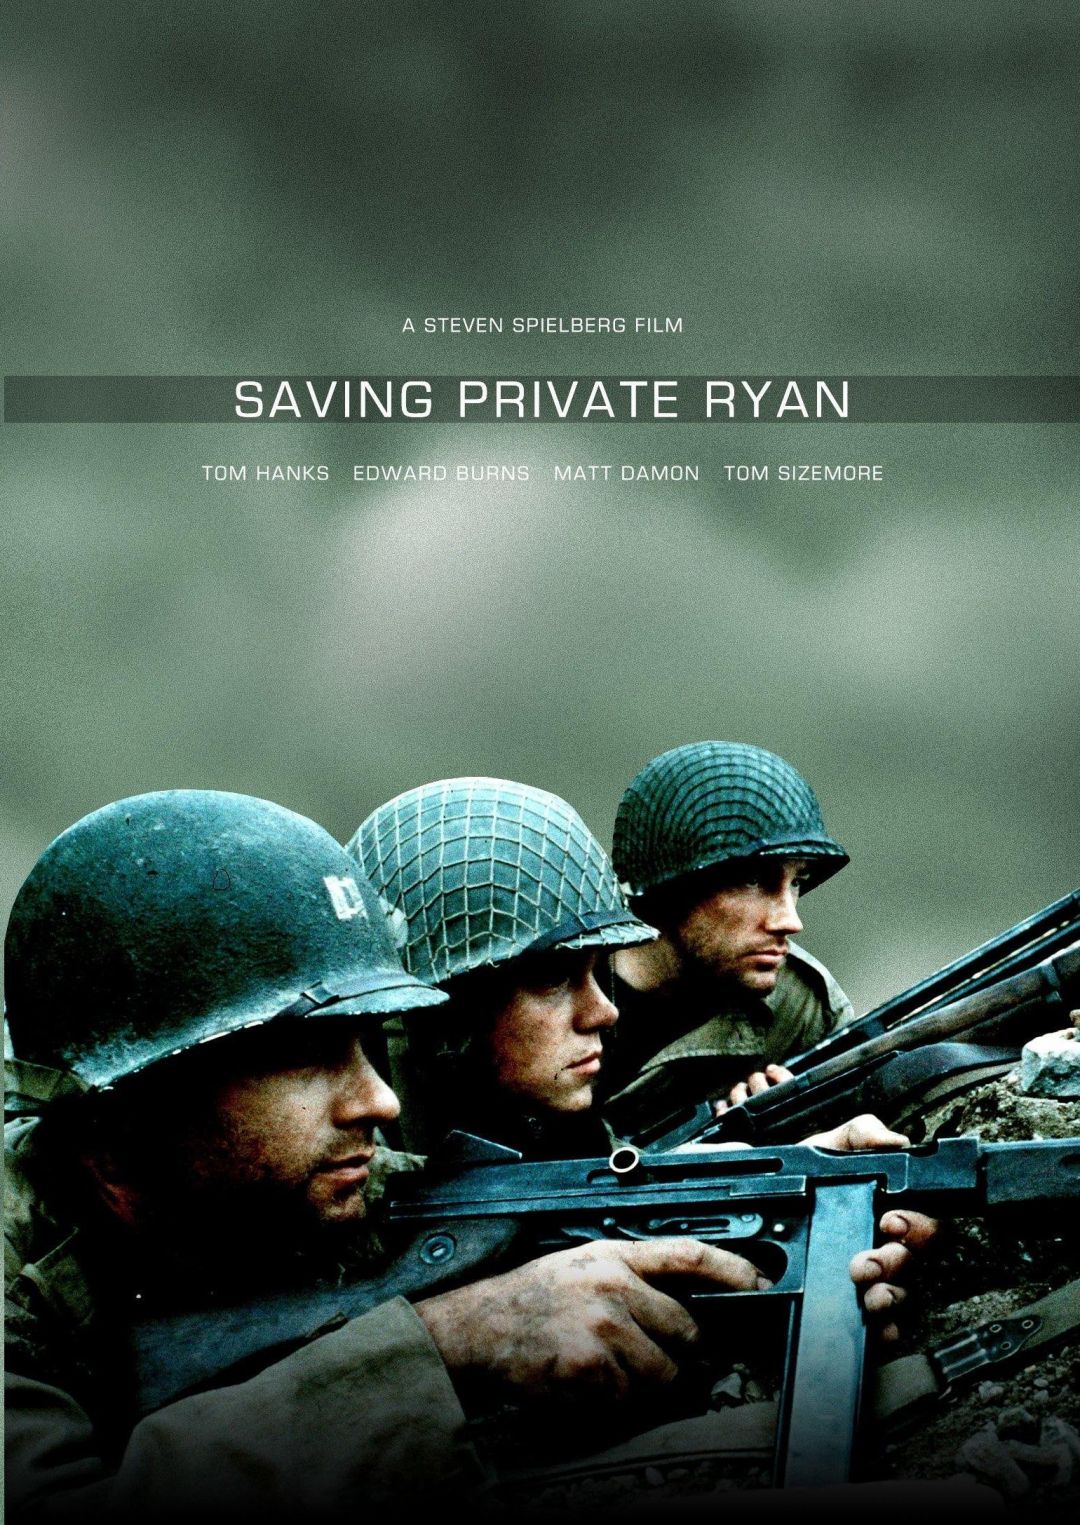 Saving Private Ryan Wallpaper High Quality Android